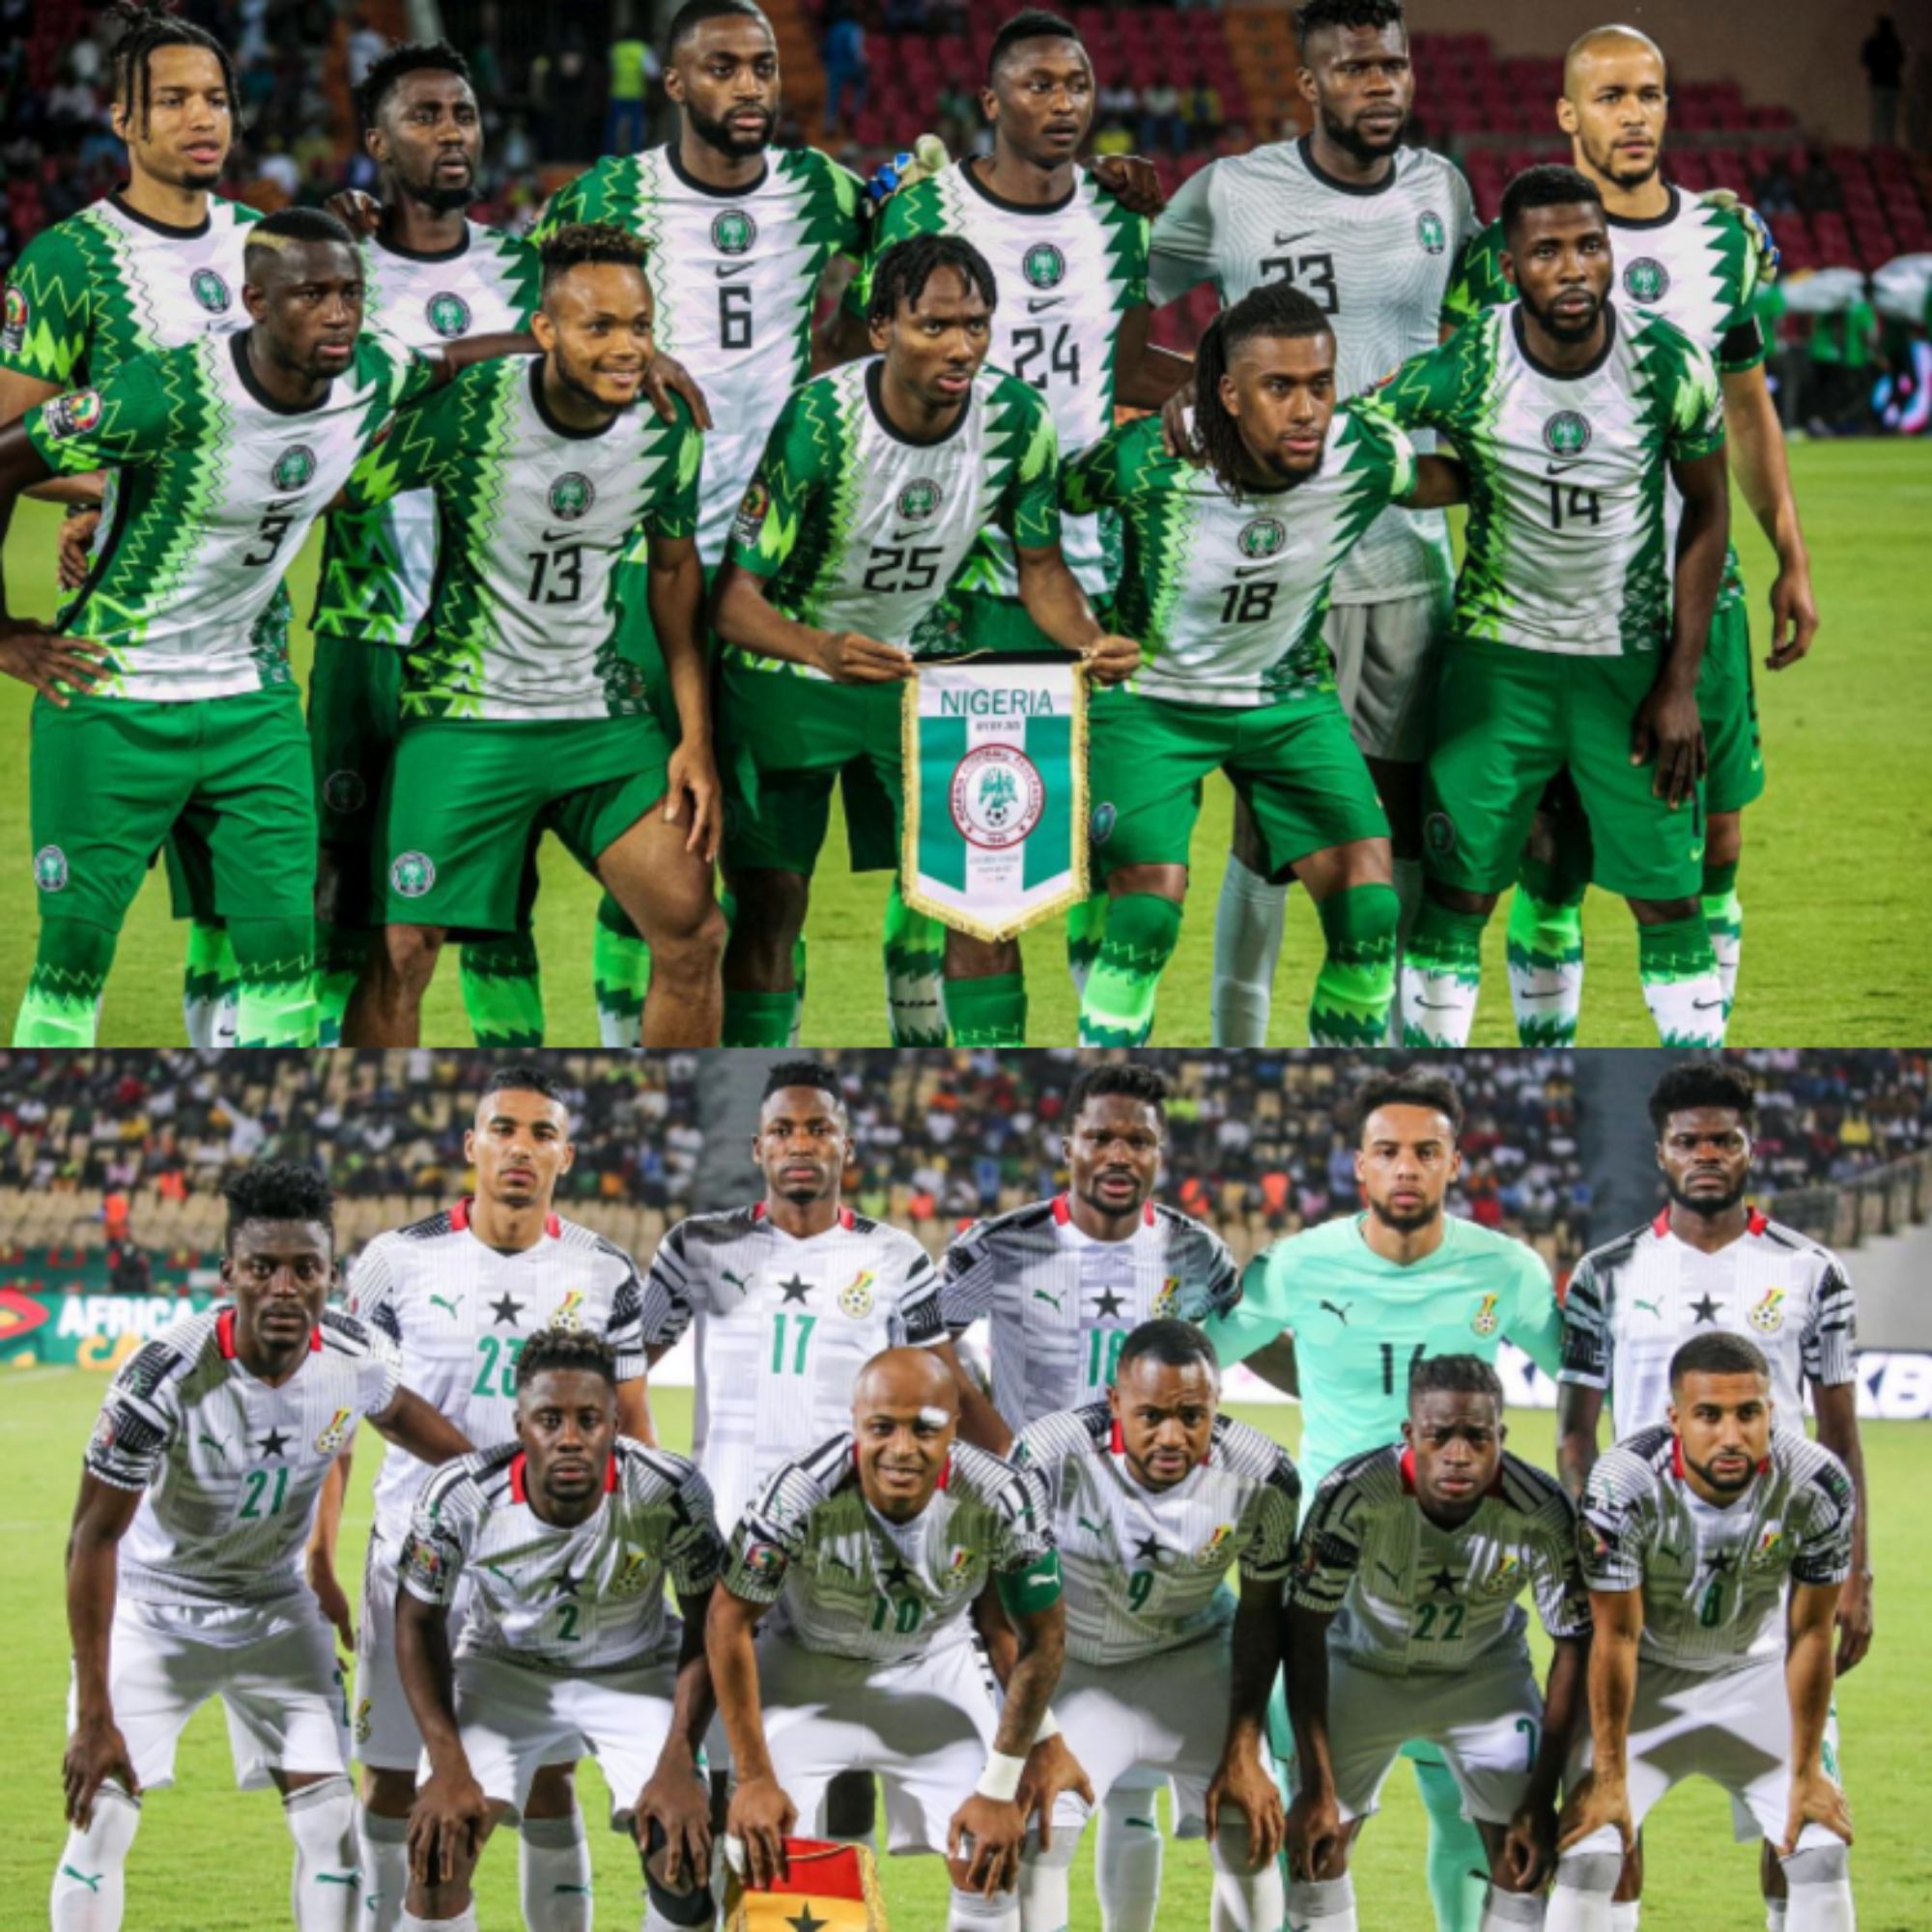 Odegbami: A Tale Of Two Countries – Between Nigeria And Ghana!